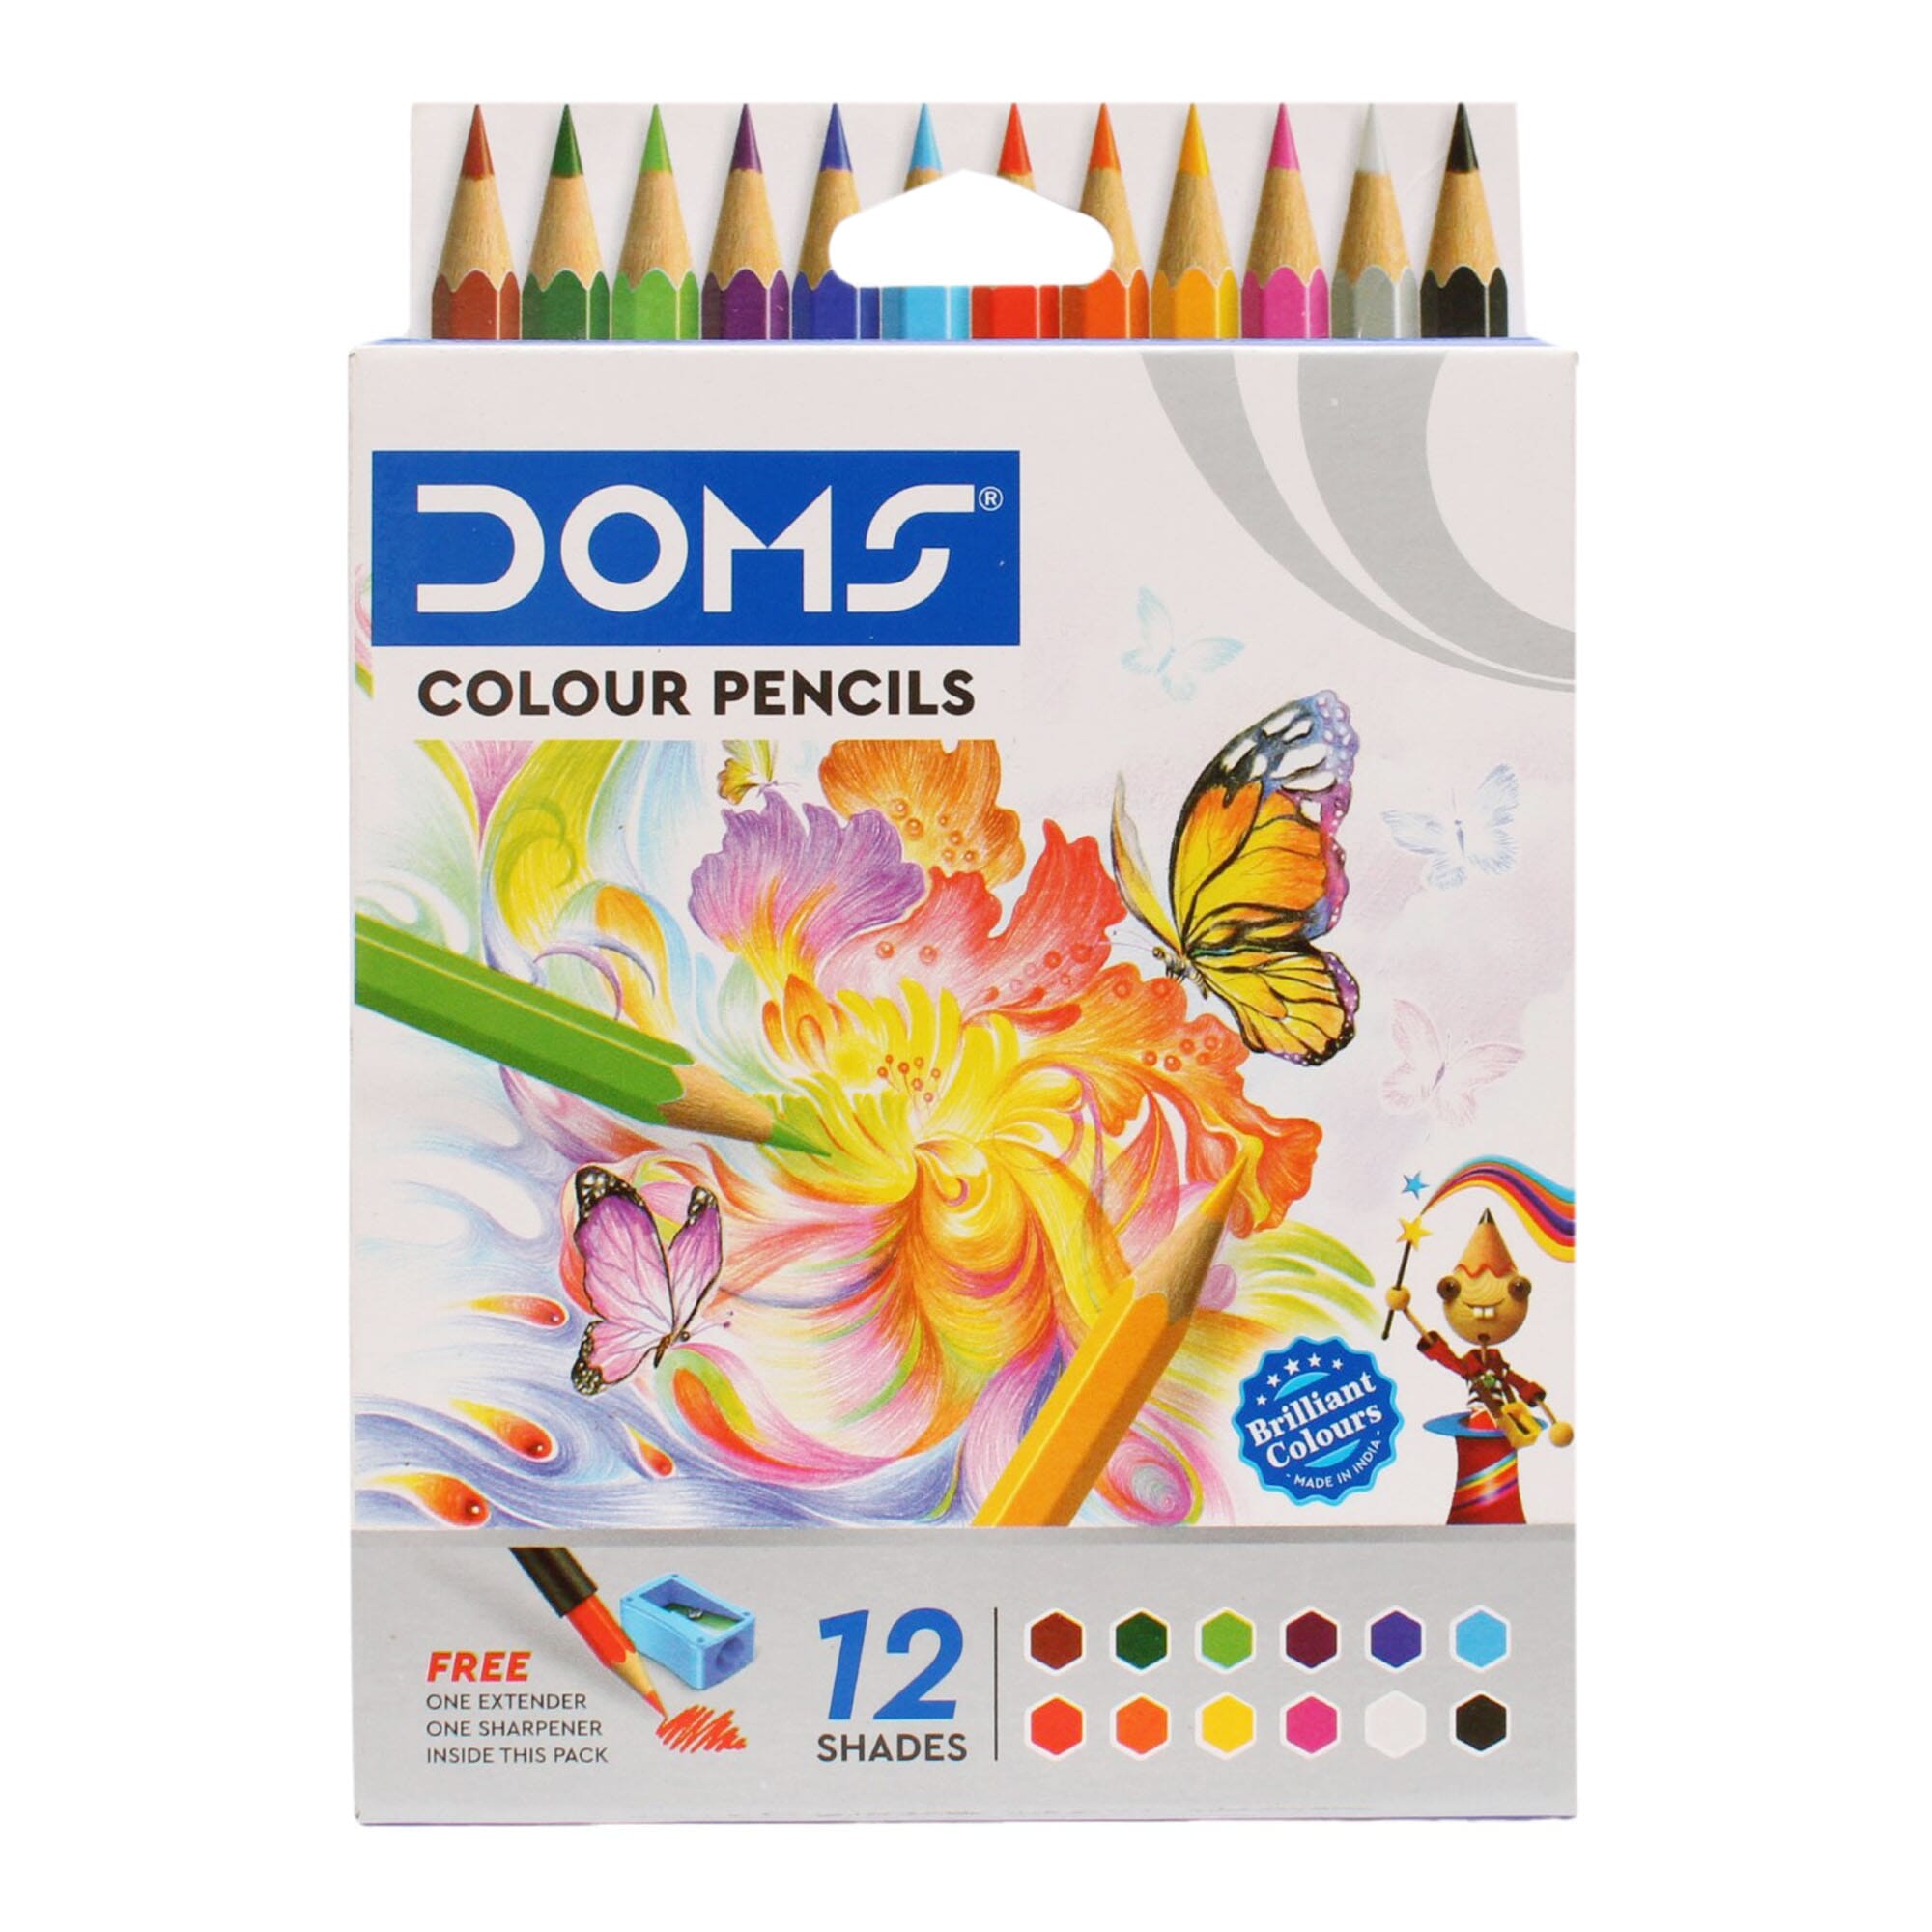 Doms Colour Pencils (Pack of 12 Shades )